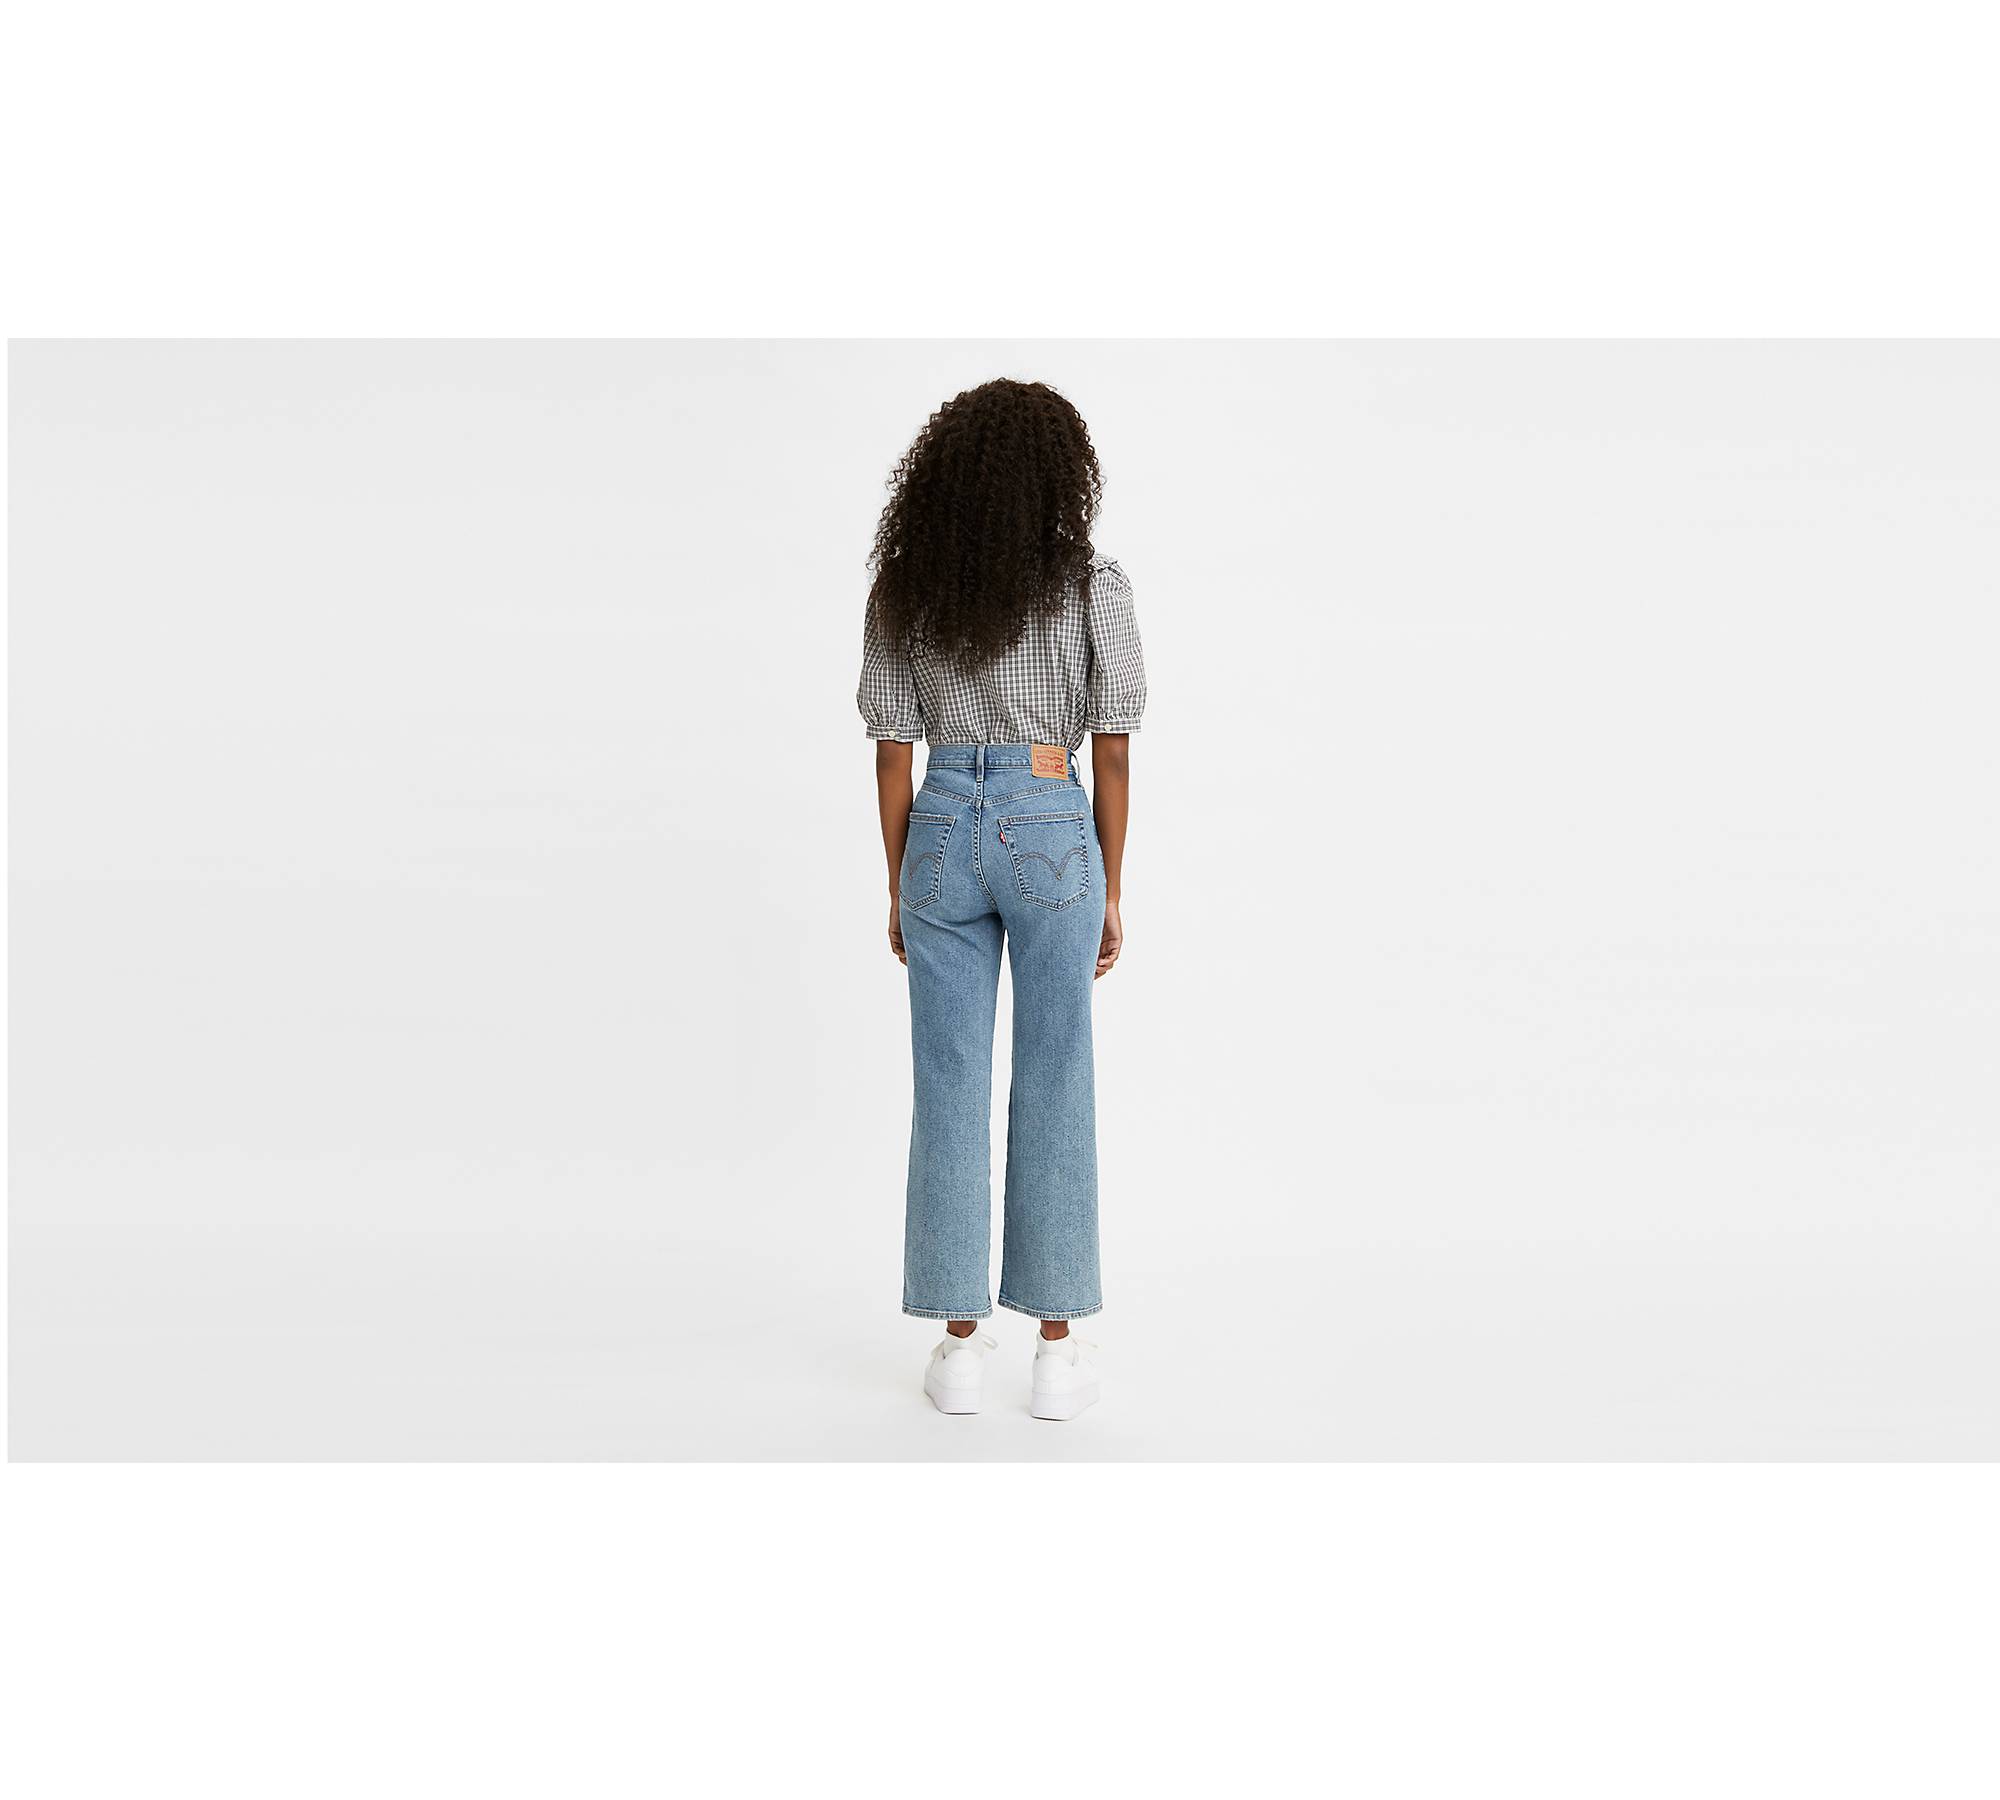 Lynda X High Waist Cropped Flare Cropped Flare Jeans Trousers, Jeans